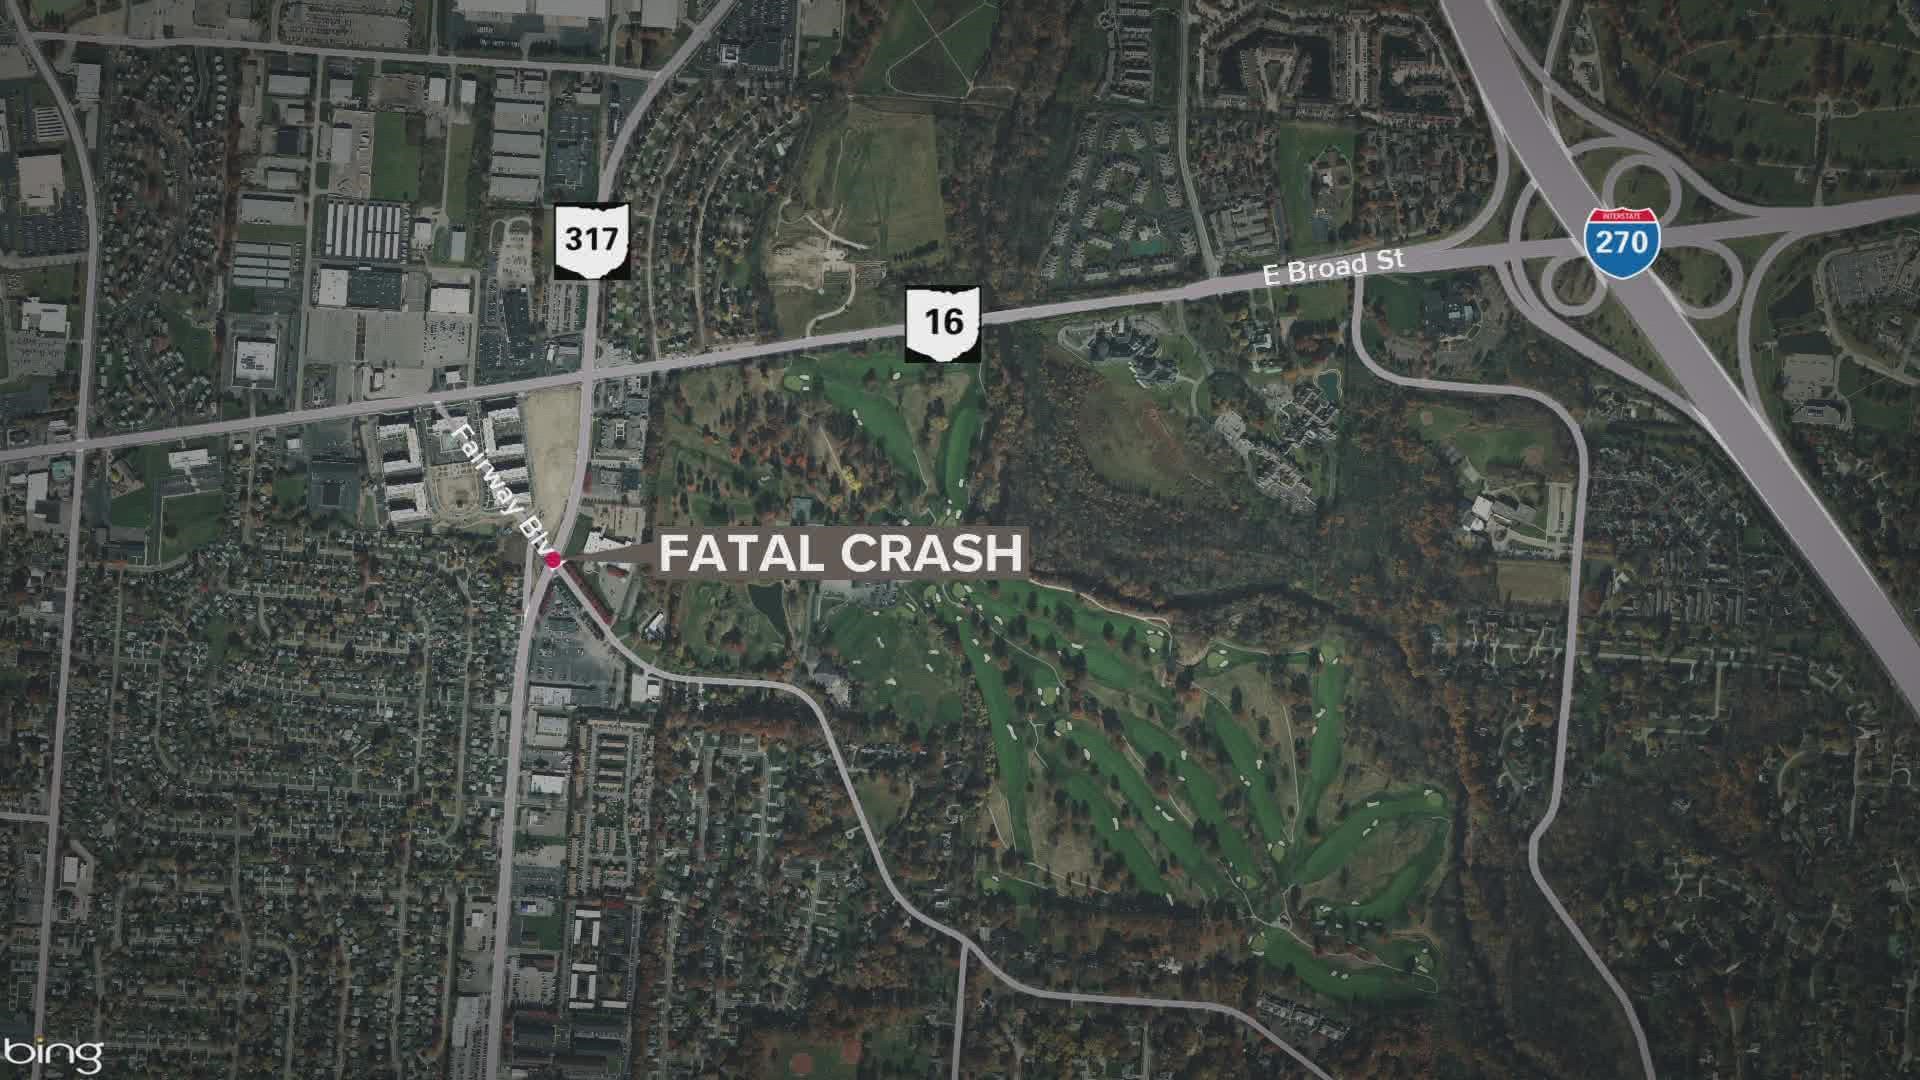 One person is dead after crashing into a power pole in Whitehall early Friday morning.